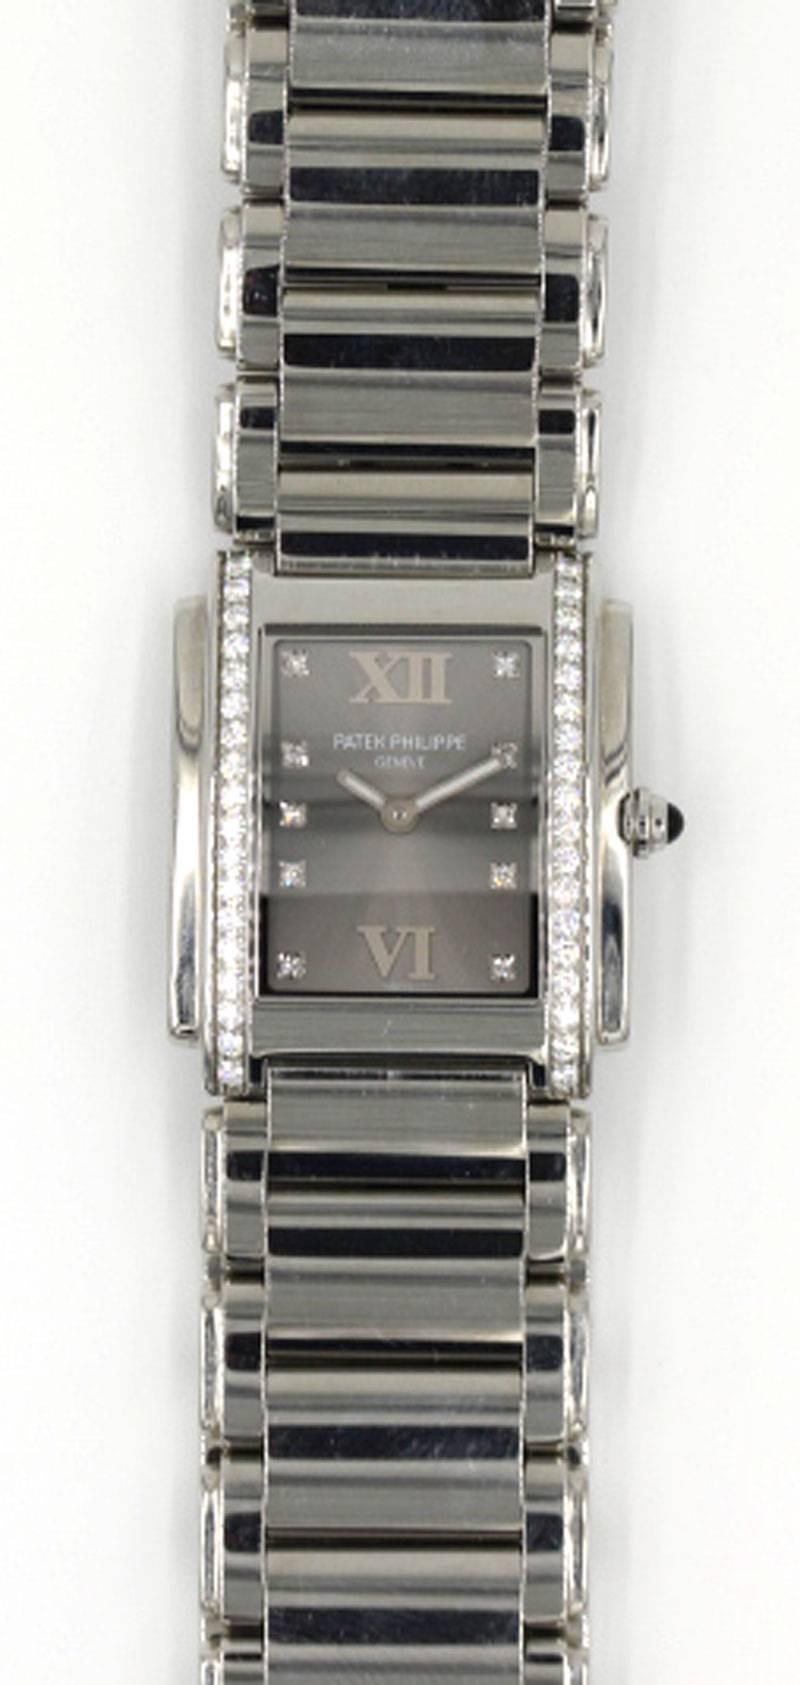  Patek Philippe Twenty-4 4910/10A Ladies Steel & Diamond Watch.  The tank shape watch, 25 x 30 mm, is set with 36 round brilliant cut diamonds in the bezel, quartz movement, and a black dial.  Pre-owned and in excellent condition.  Model 4910/10A. 